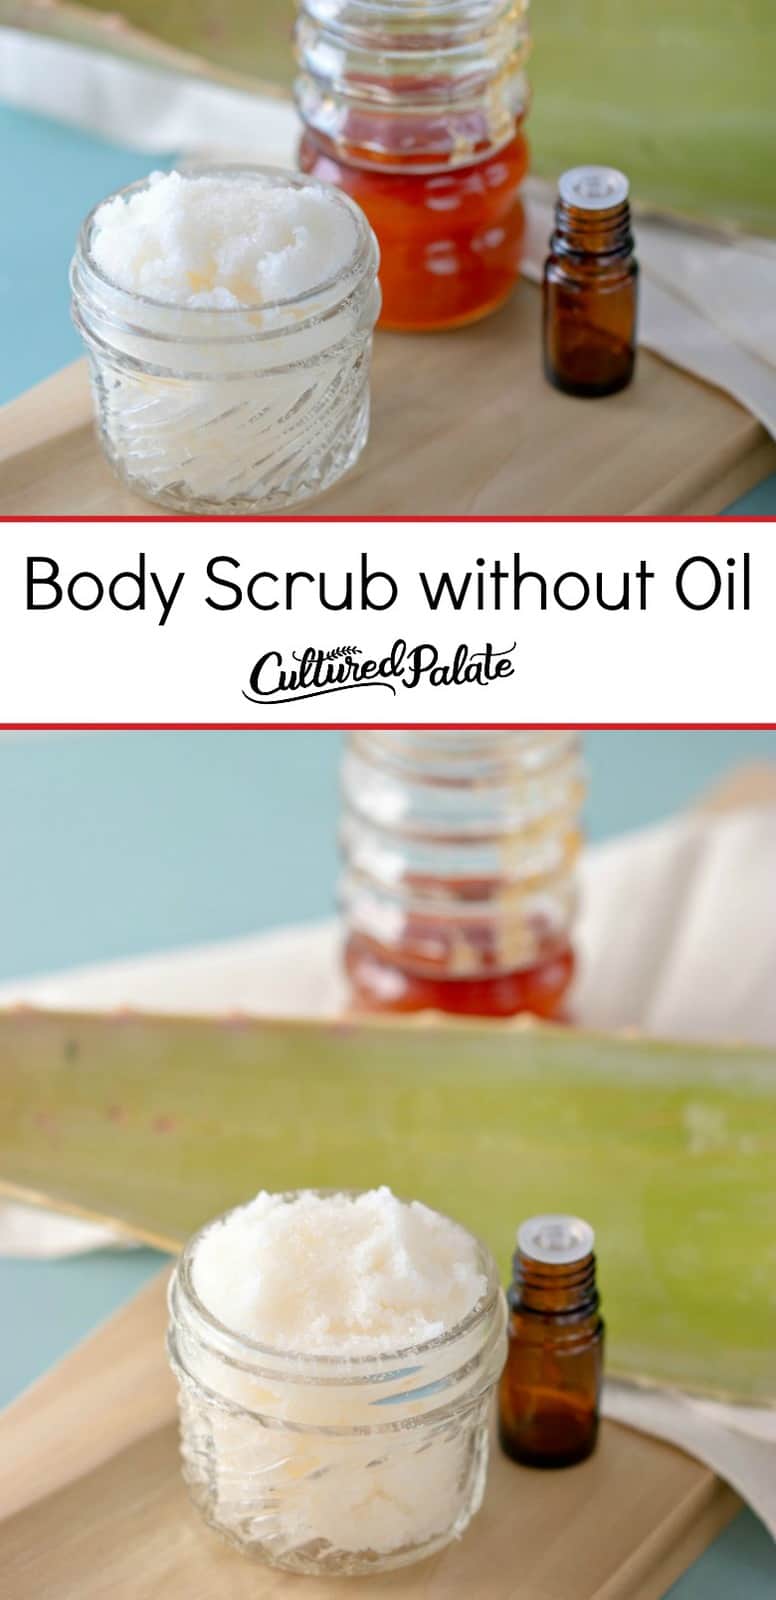 Body Scrub without Oil shown with two images both in glass jar with aloe, essential oil and honey in background with text overlay.